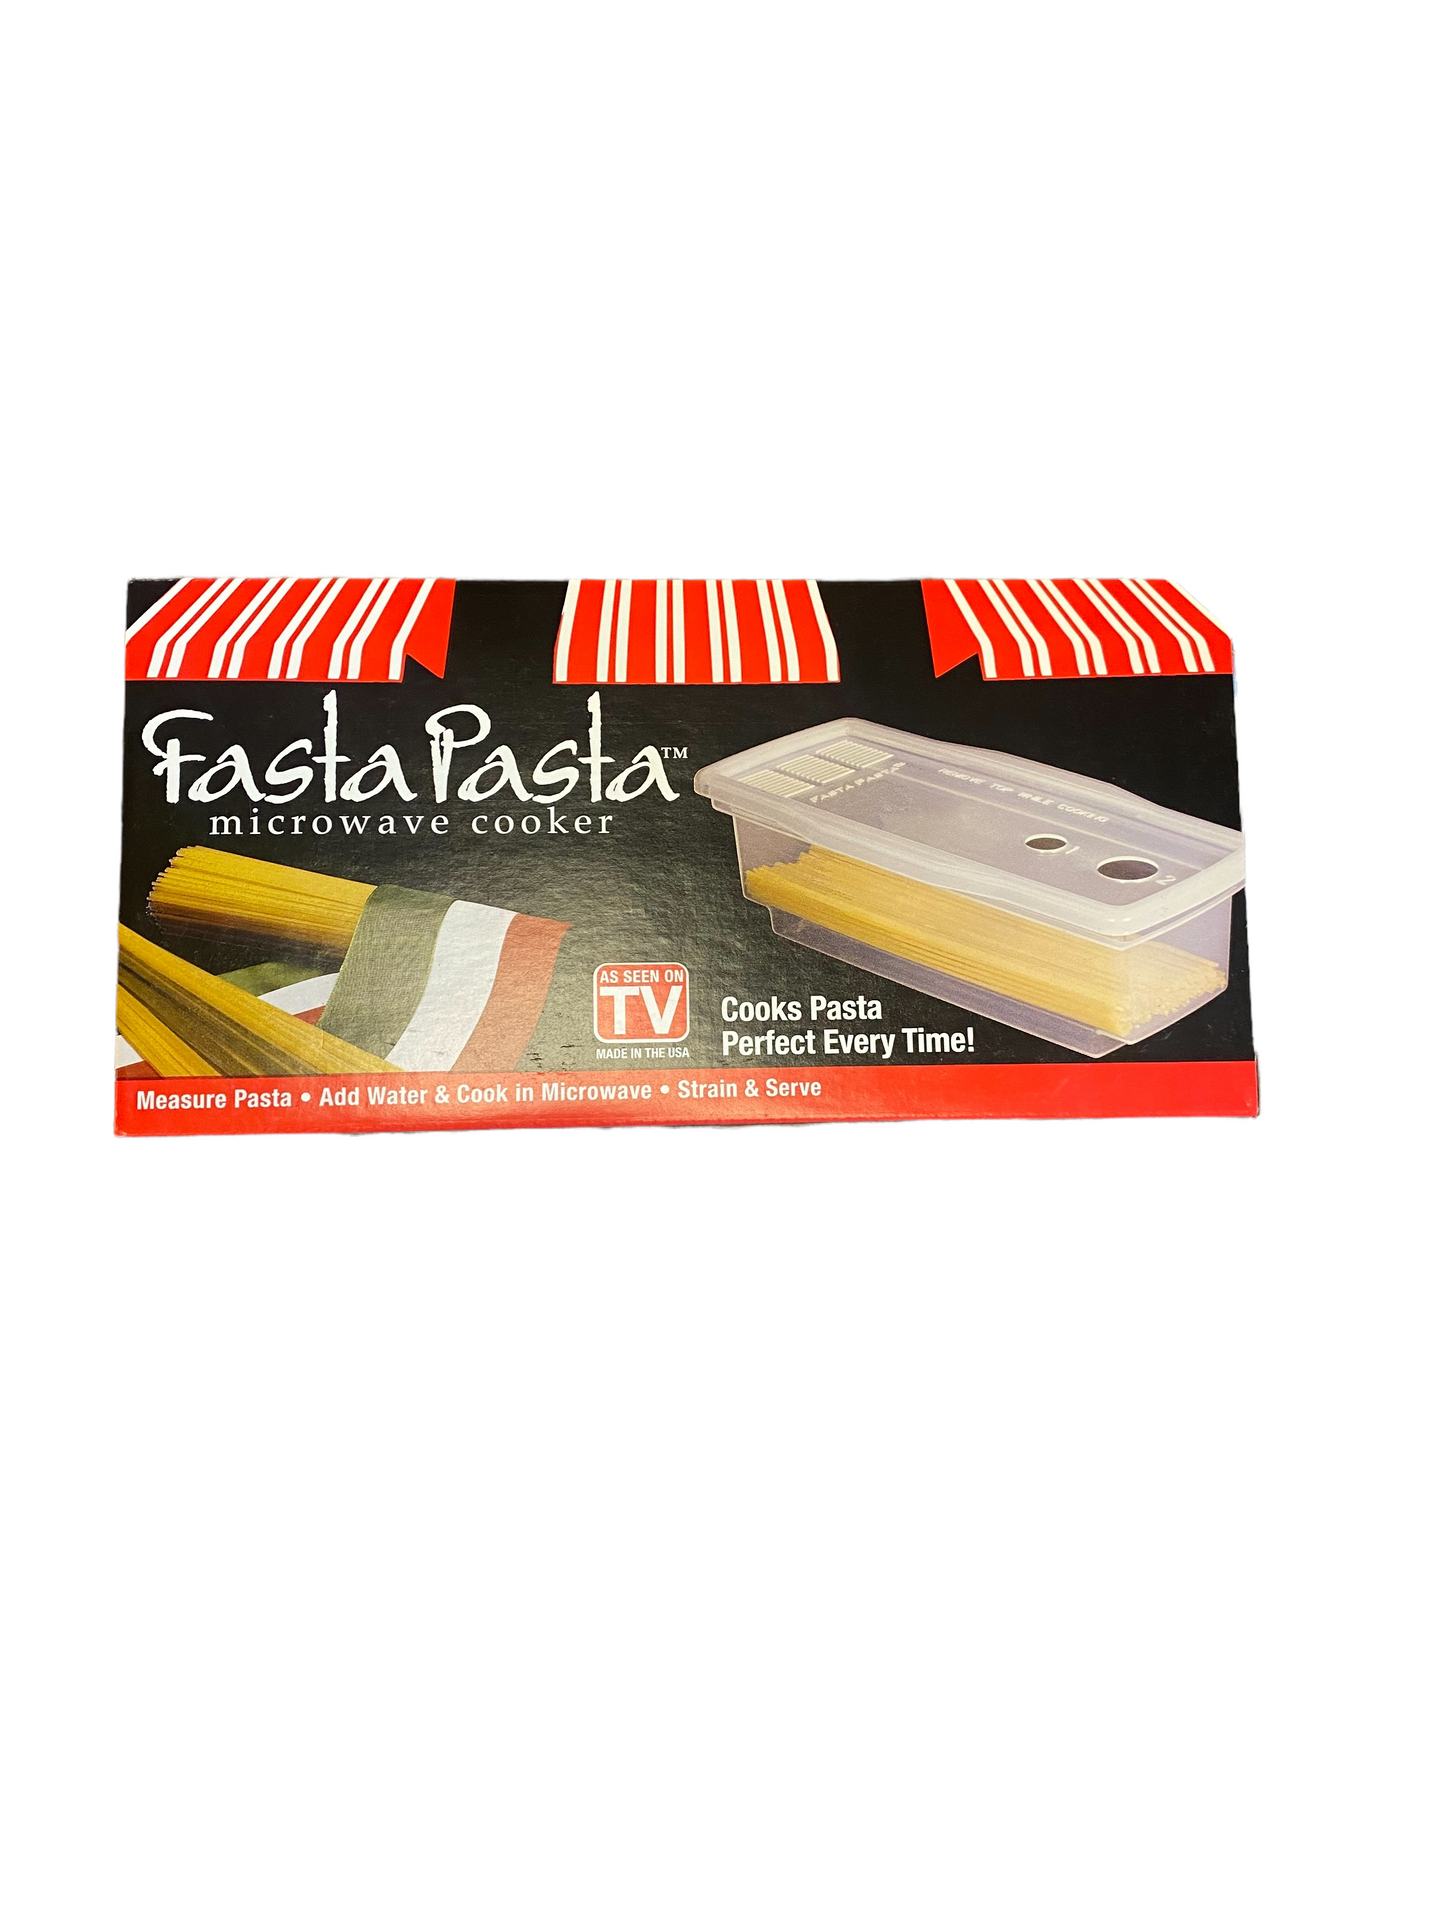 Microwave Pasta Cooker The Original Fasta Pasta As seen on TV NEW in box Unused